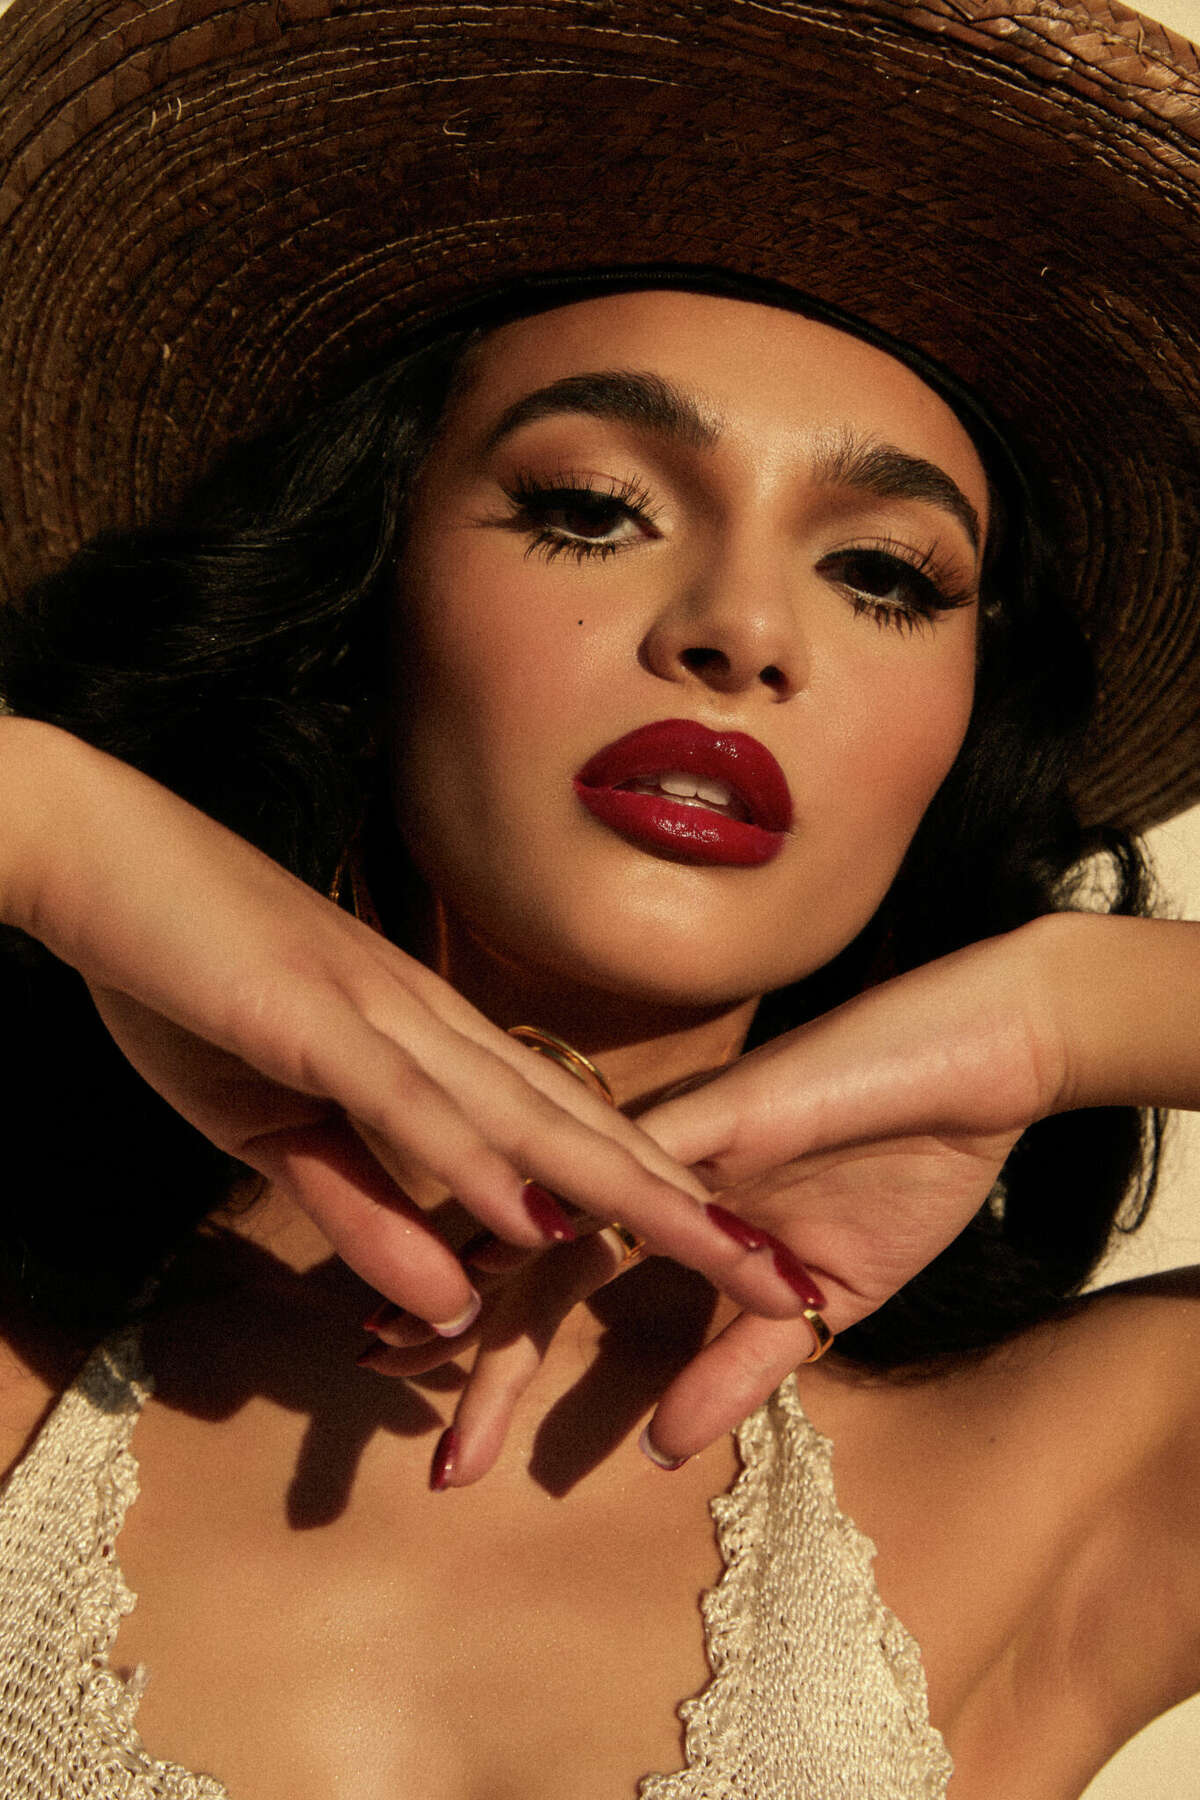 Paulina Chávez in a Maria Felix-inspired photo shoot. The young San Antonio actress discovered she has a family connection to the legendary actress from the Golden Age of Mexican cinema.